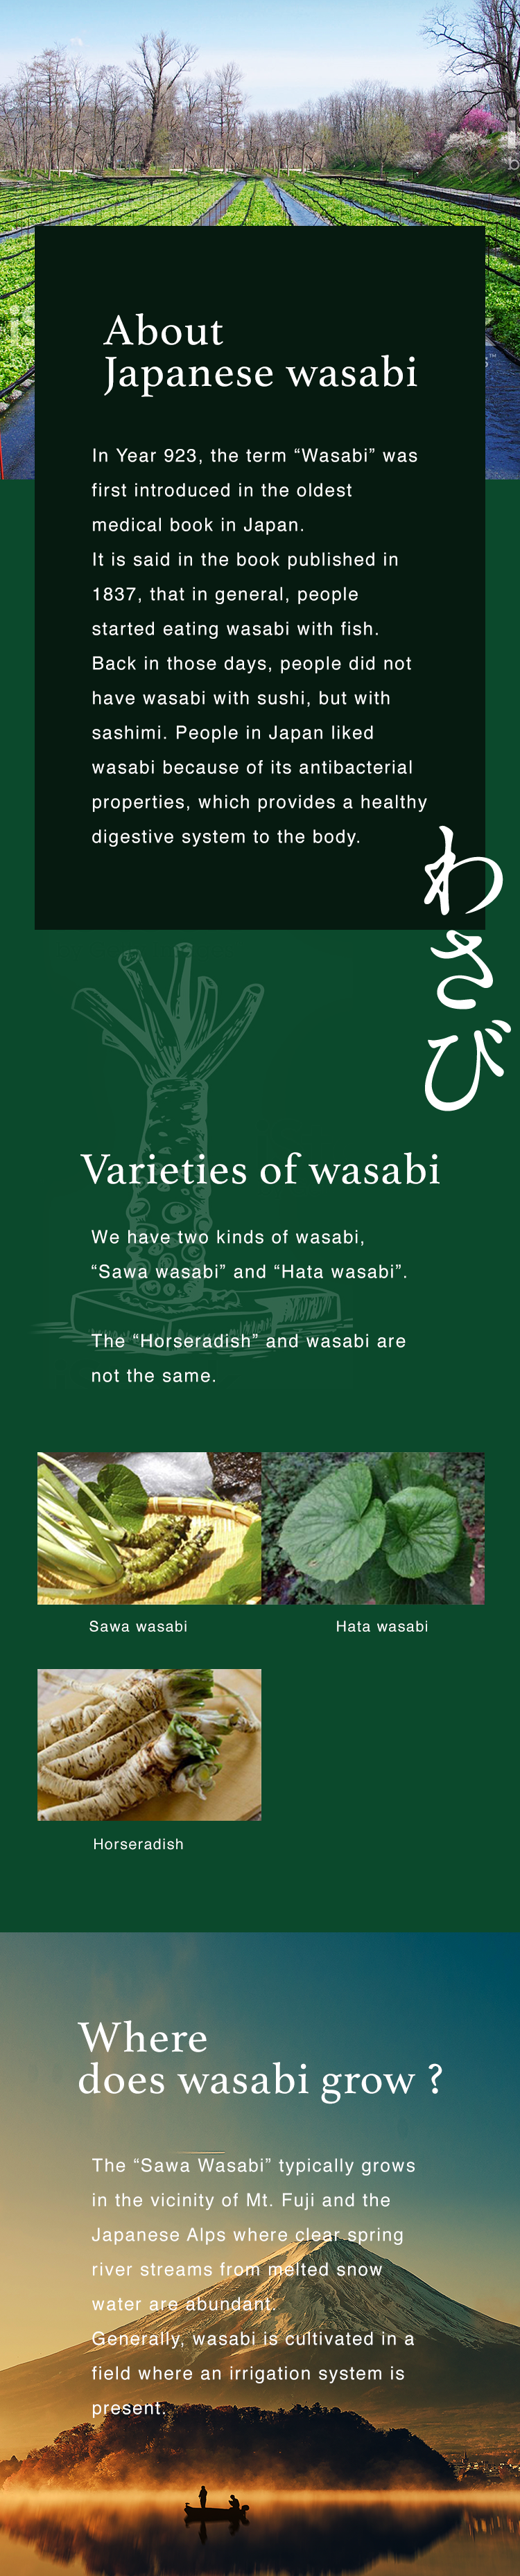 About Japanese wasabi - In Year 923, the term “Wasabi” was first introduced in the oldest medical book in Japan. It is said in the book published in 1837, that in general, people started eating wasabi with fish. Back in those days, people did not have wasabi with sushi, but with sashimi. People in Japan liked wasabi because of its antibacterial properties, which provides a healthy digestive system to the body. | Varieties of wasabi - We have two kinds of wasabi, “Sawa wasabi” and “Hata wasabi”. The “Horseradish” and wasabi are not the same. | Sawa wasabi | Hata wasabi | Horseradish | Where does wasabi grow? - The “Sawa Wasabi” typically grows in the vicinity of Mt. Fuji and the Japanese Alps where clear spring river streams from melted snow water are abundant. Generally, wasabi is cultivated in a field where an irrigation system is present.